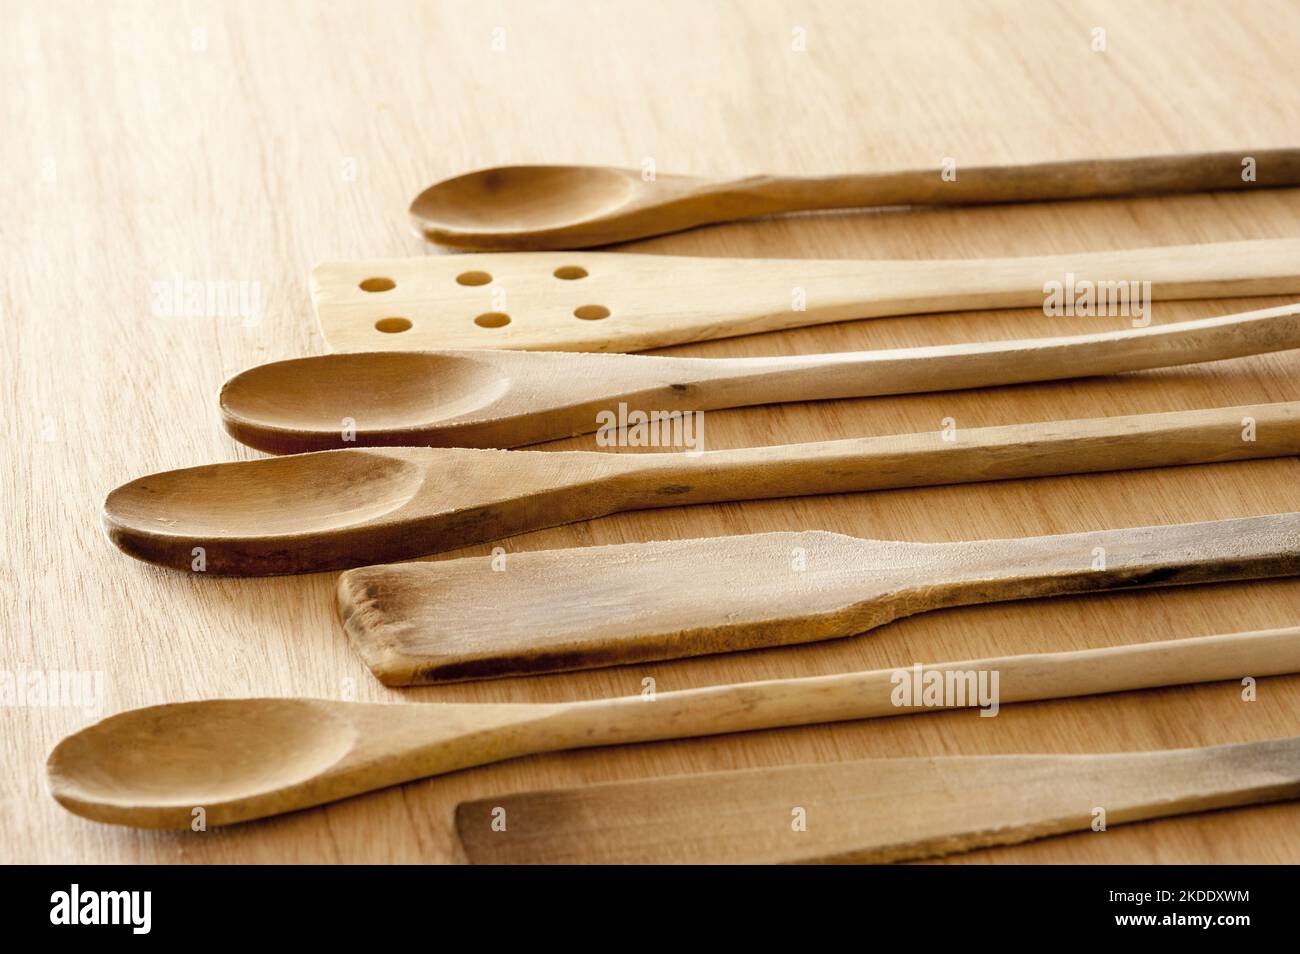 Selection of plain wooden rustic kitchen utensils with assorted spoons, spatulas and strainer in a receding low angle view on a wooden table Stock Photo